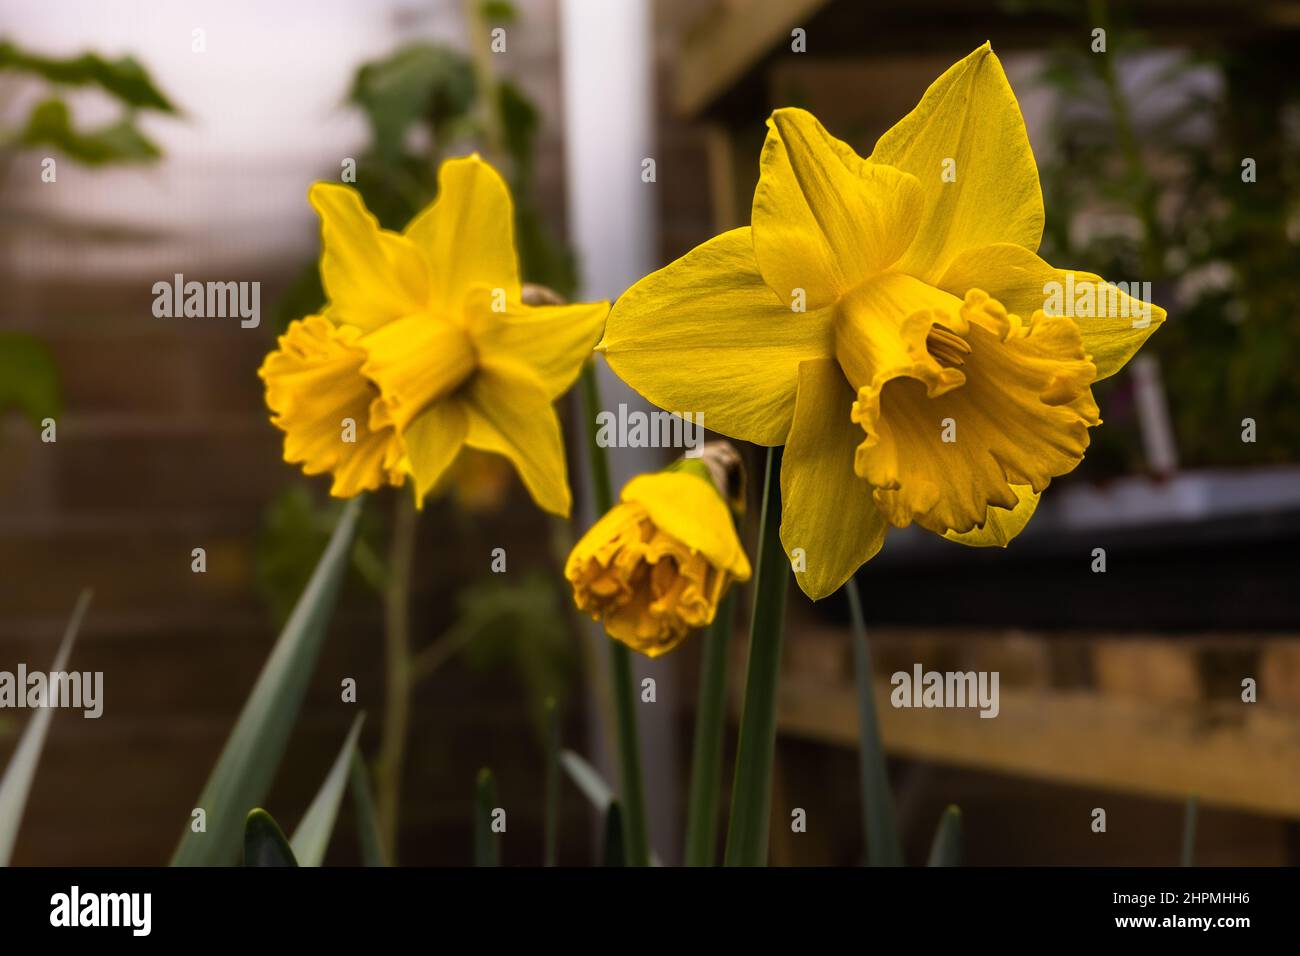 Narcissus Dutch master Variety. A large trumpet division 1 Daffodil  with beautiful golden yellow flowers in greenhouse as a blurred background Stock Photo